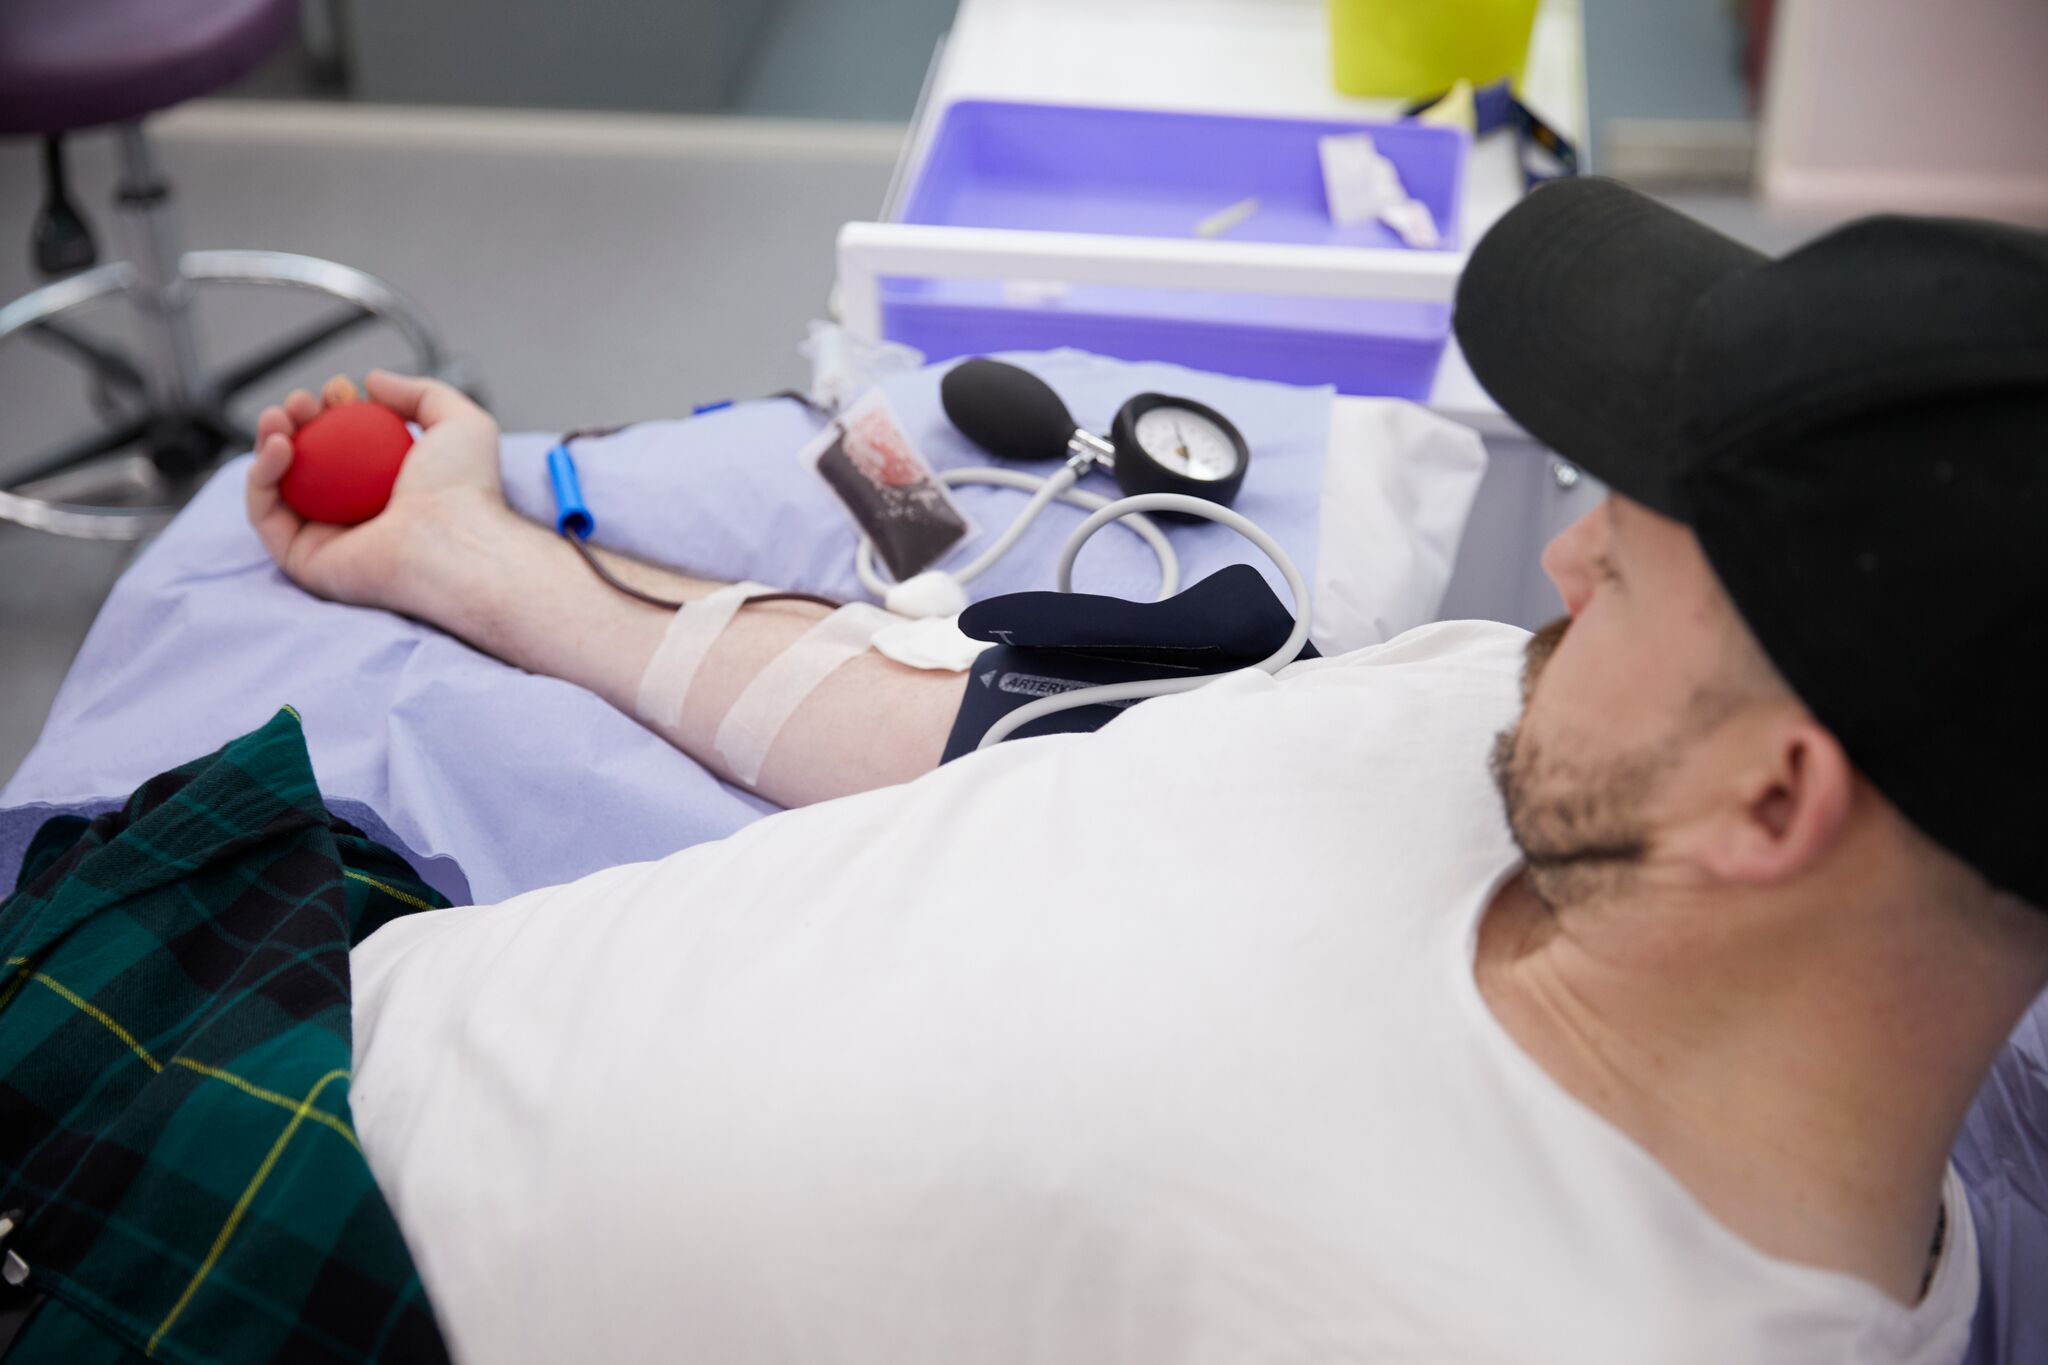 A queer man donates blood at the 'illegal blood bank', set up by activists to highlight backwards laws. (UNILAD)